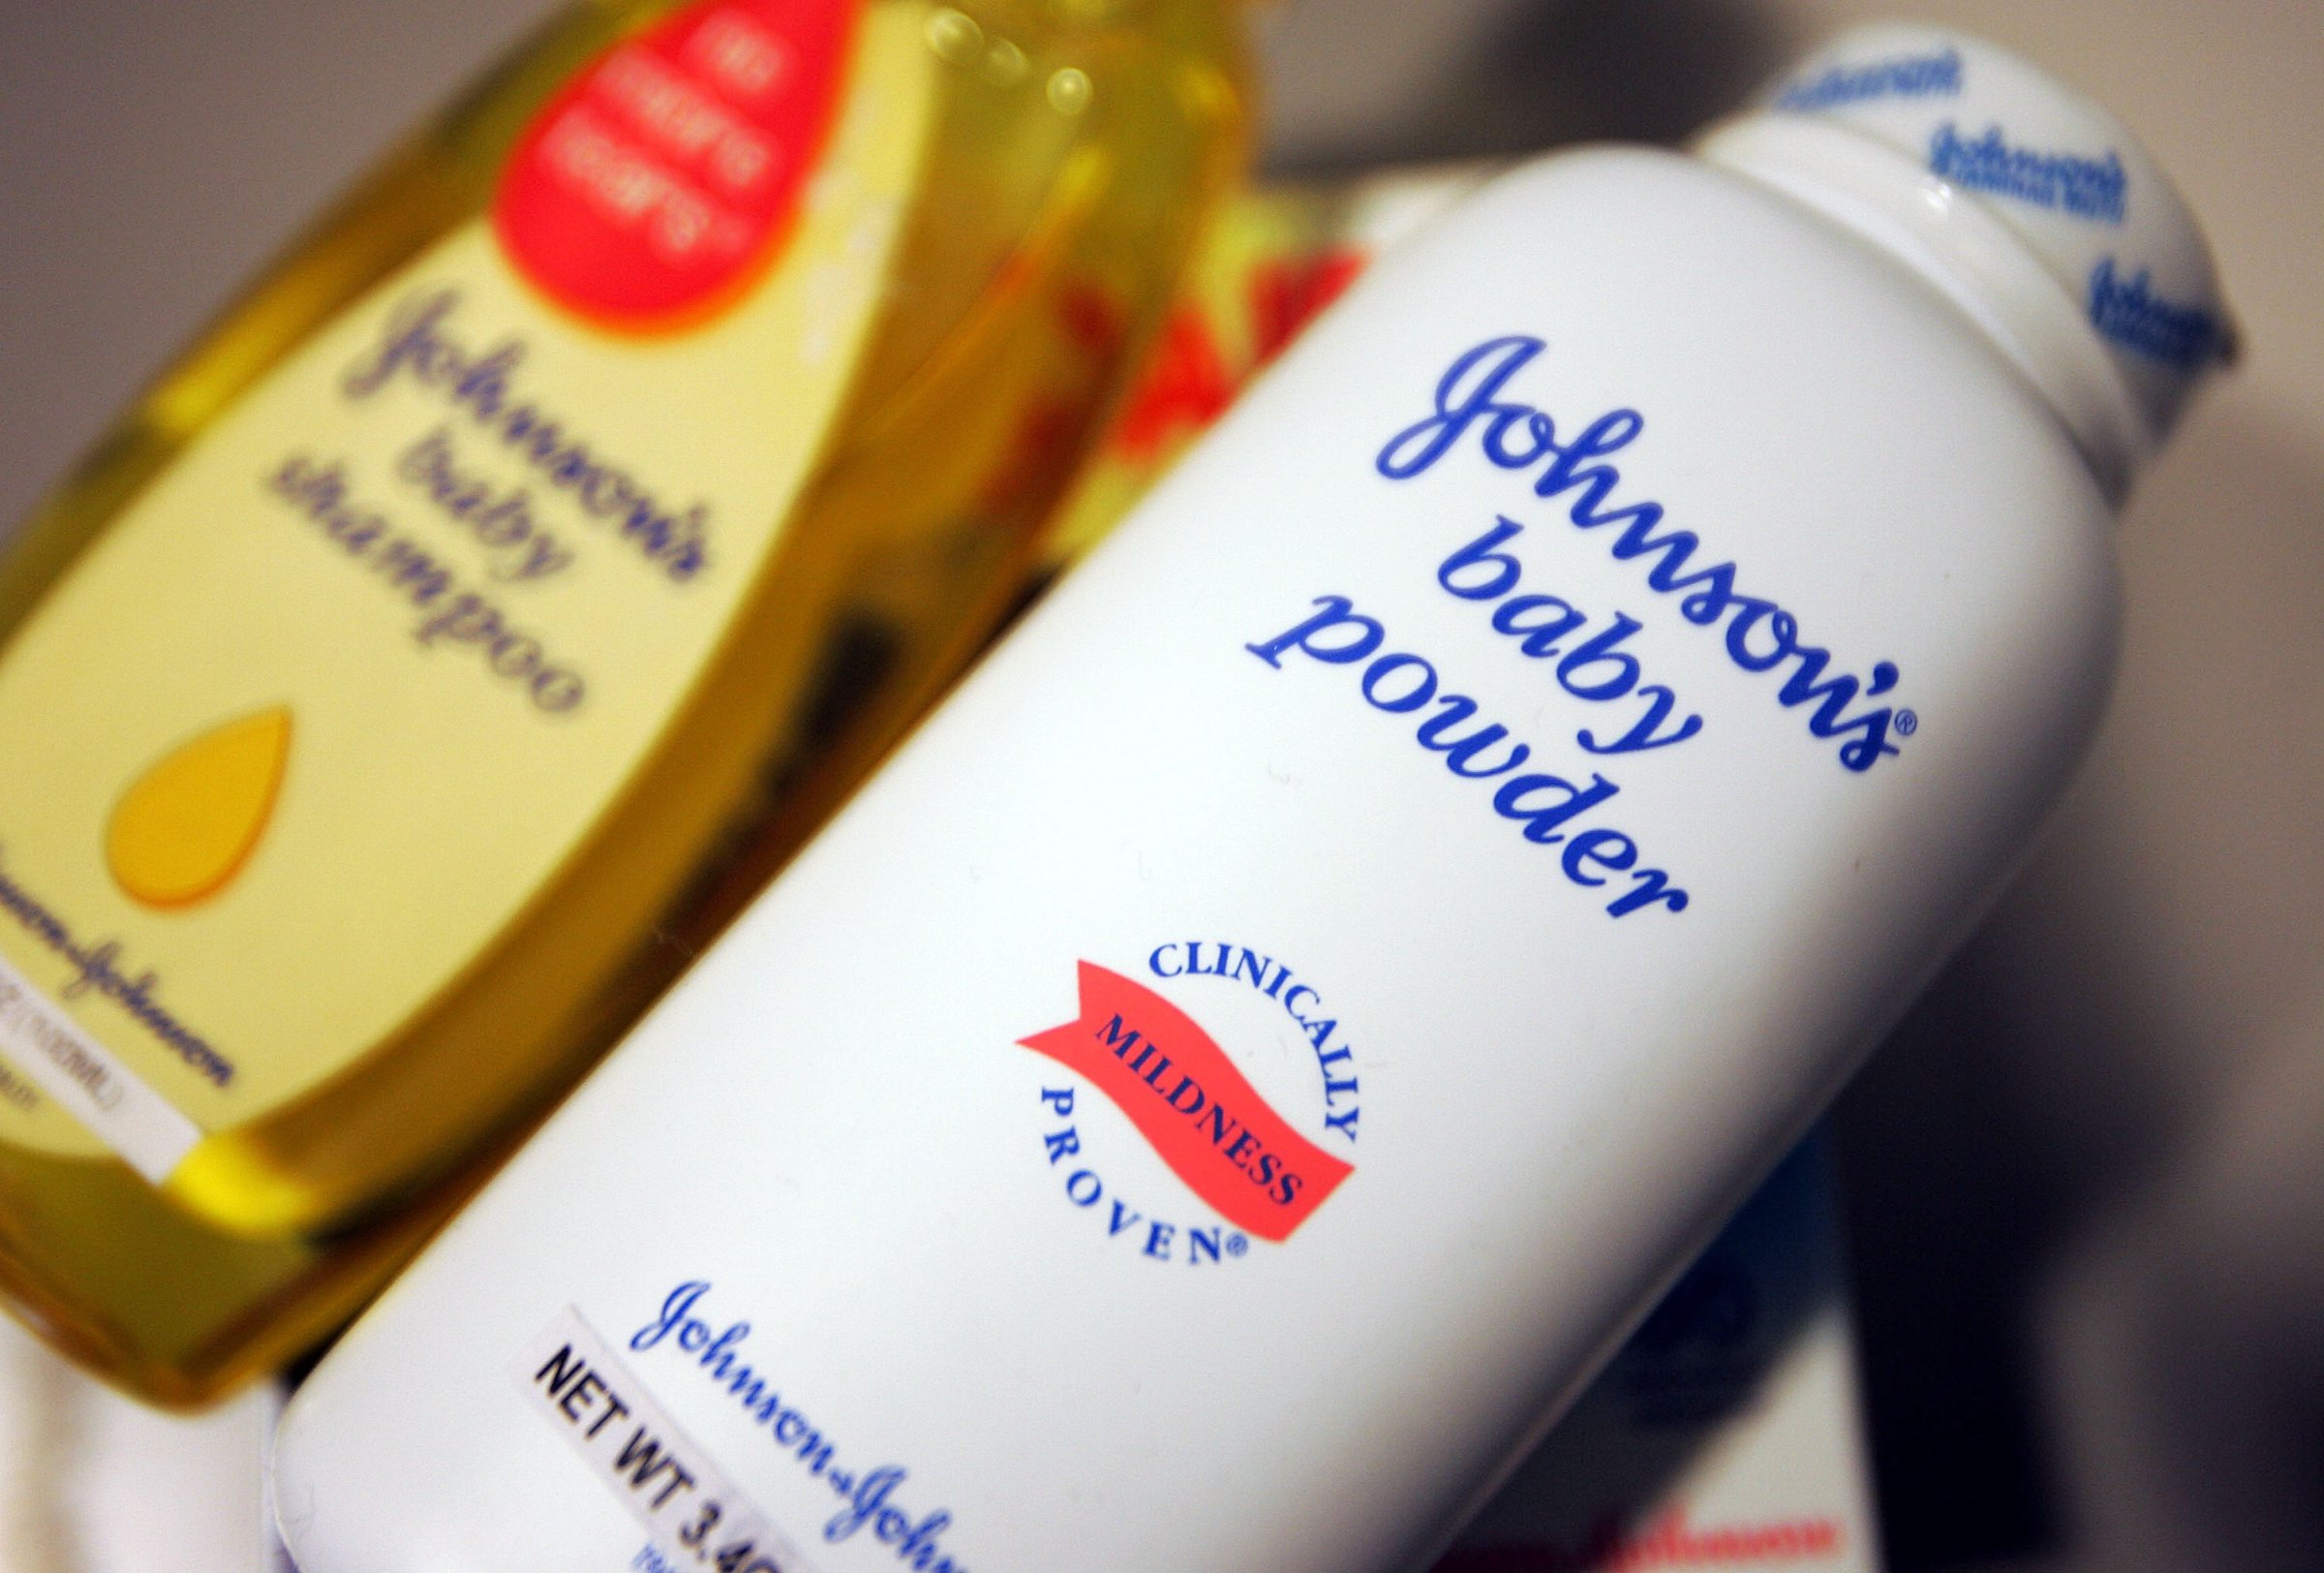 Johnson & Johnson's products are seen December 16, 2004 in New York.